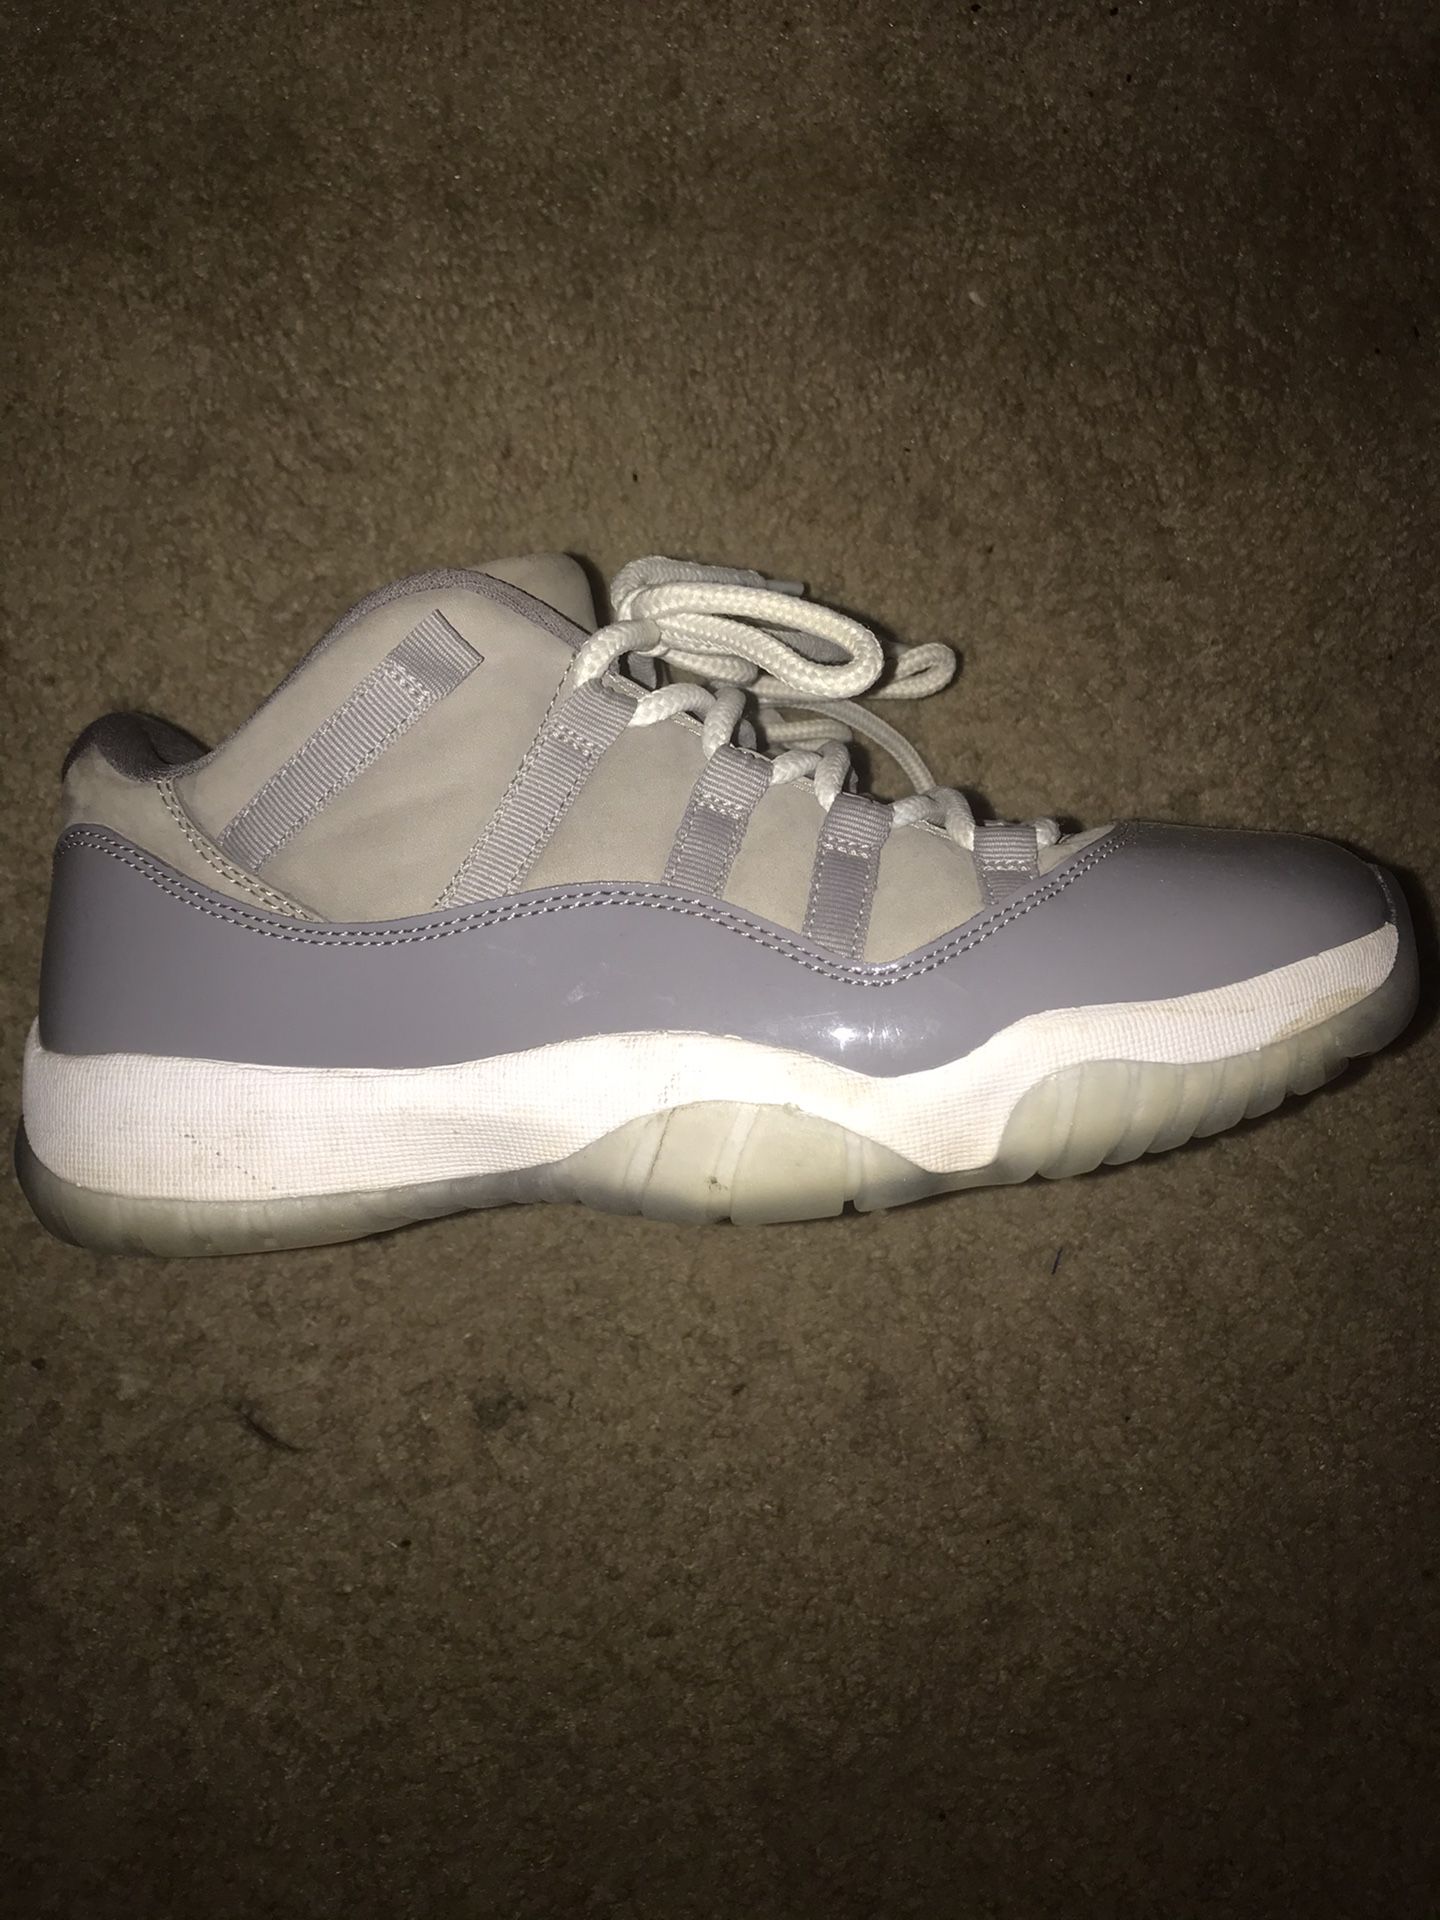 Cool Grey 11’s Size 9